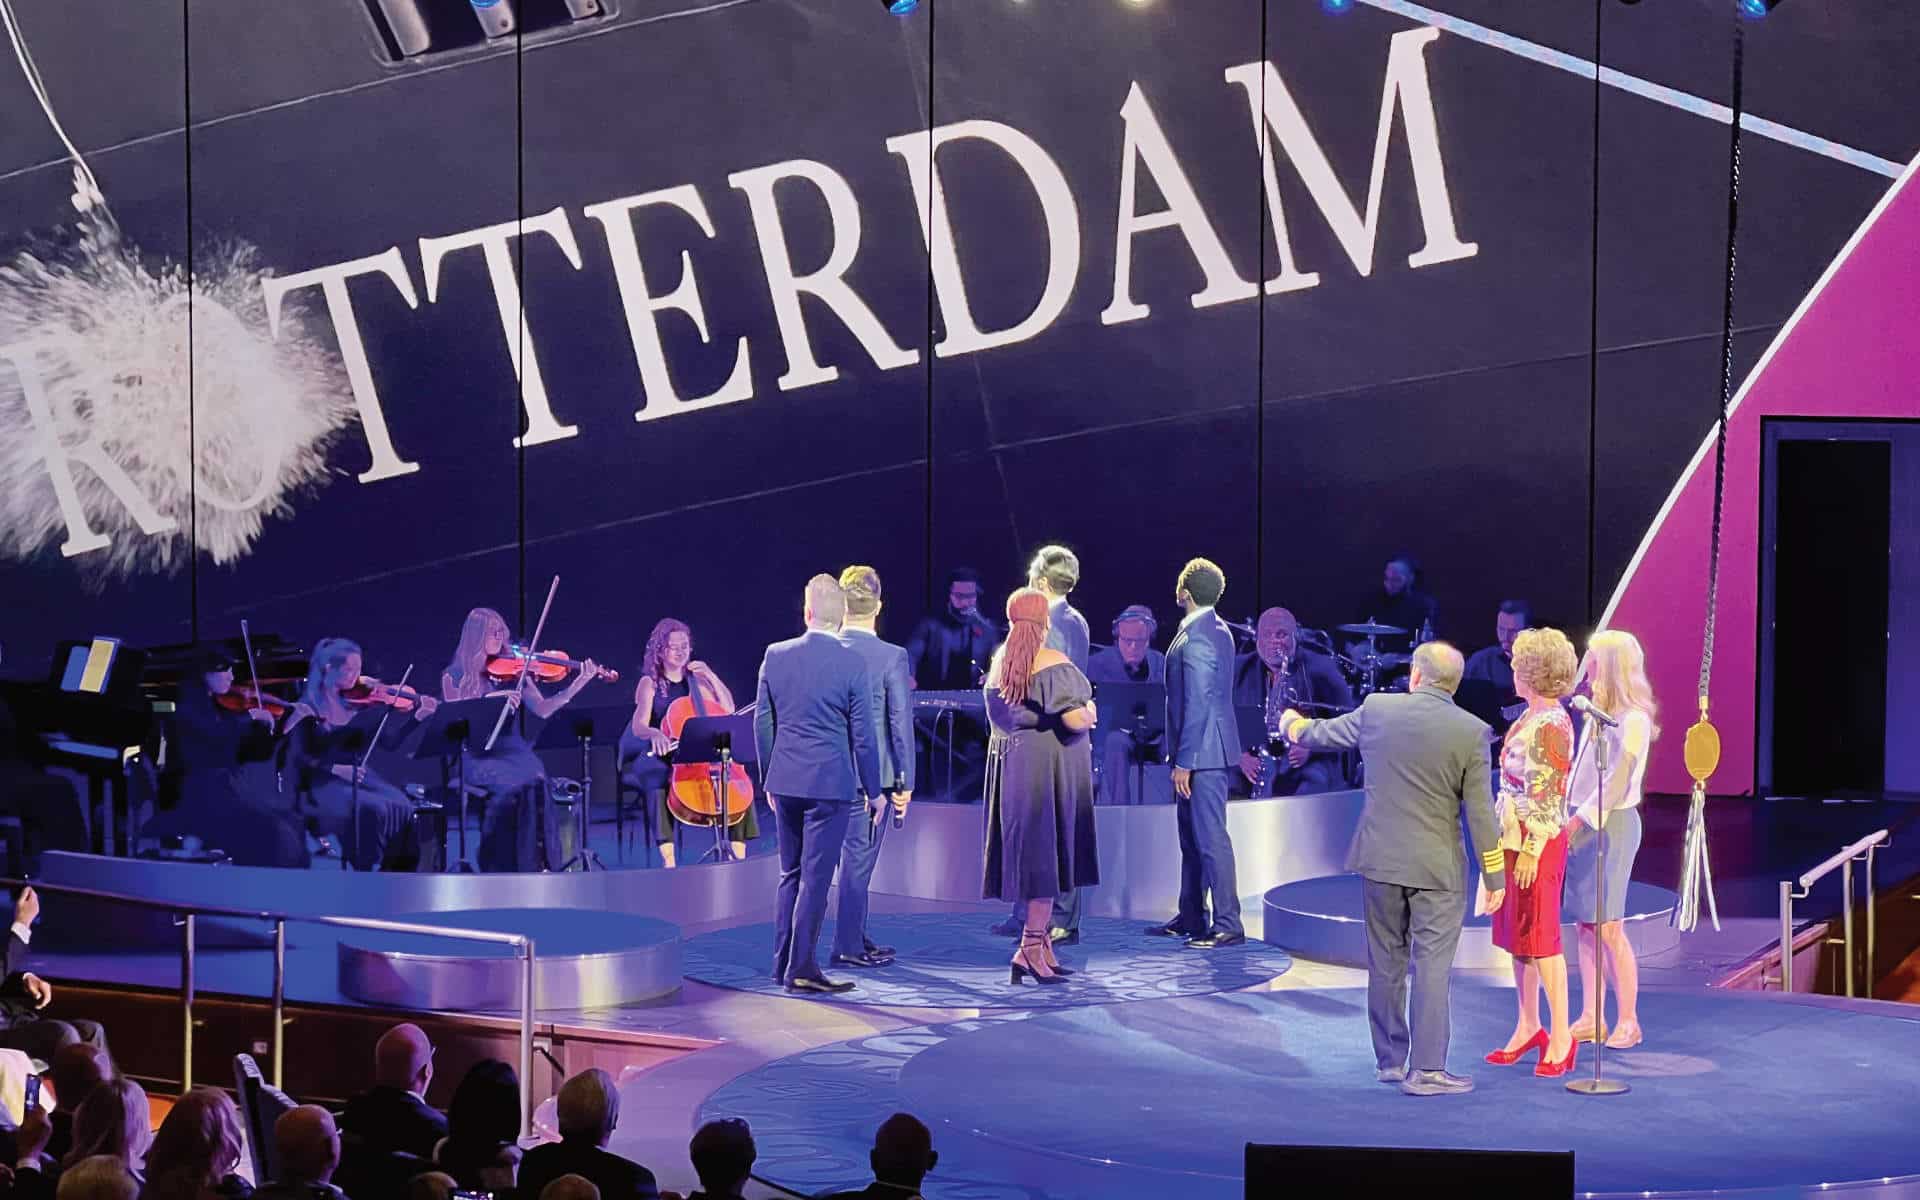 The moment Her Royal Highness Princess Margriet of the Netherlands christened Rotterdam.